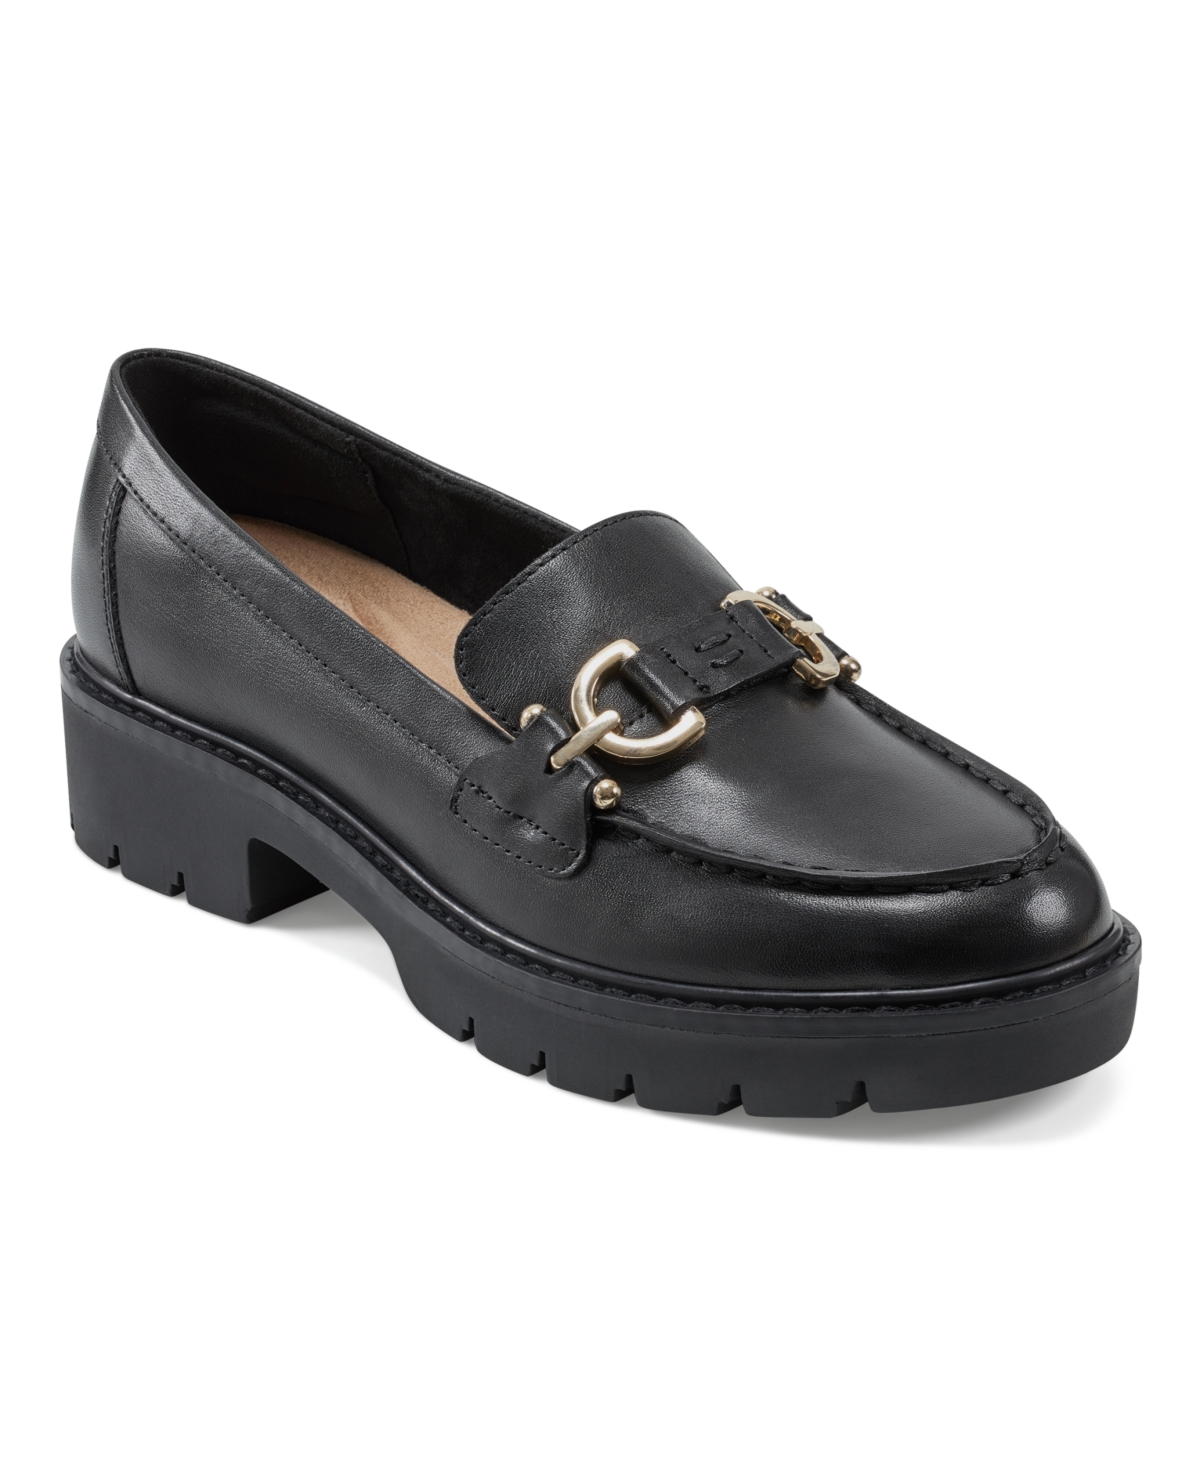 Women's Eflex Kinndle Slip-On Lug Sole Casual Loafers - Black Patent Leather